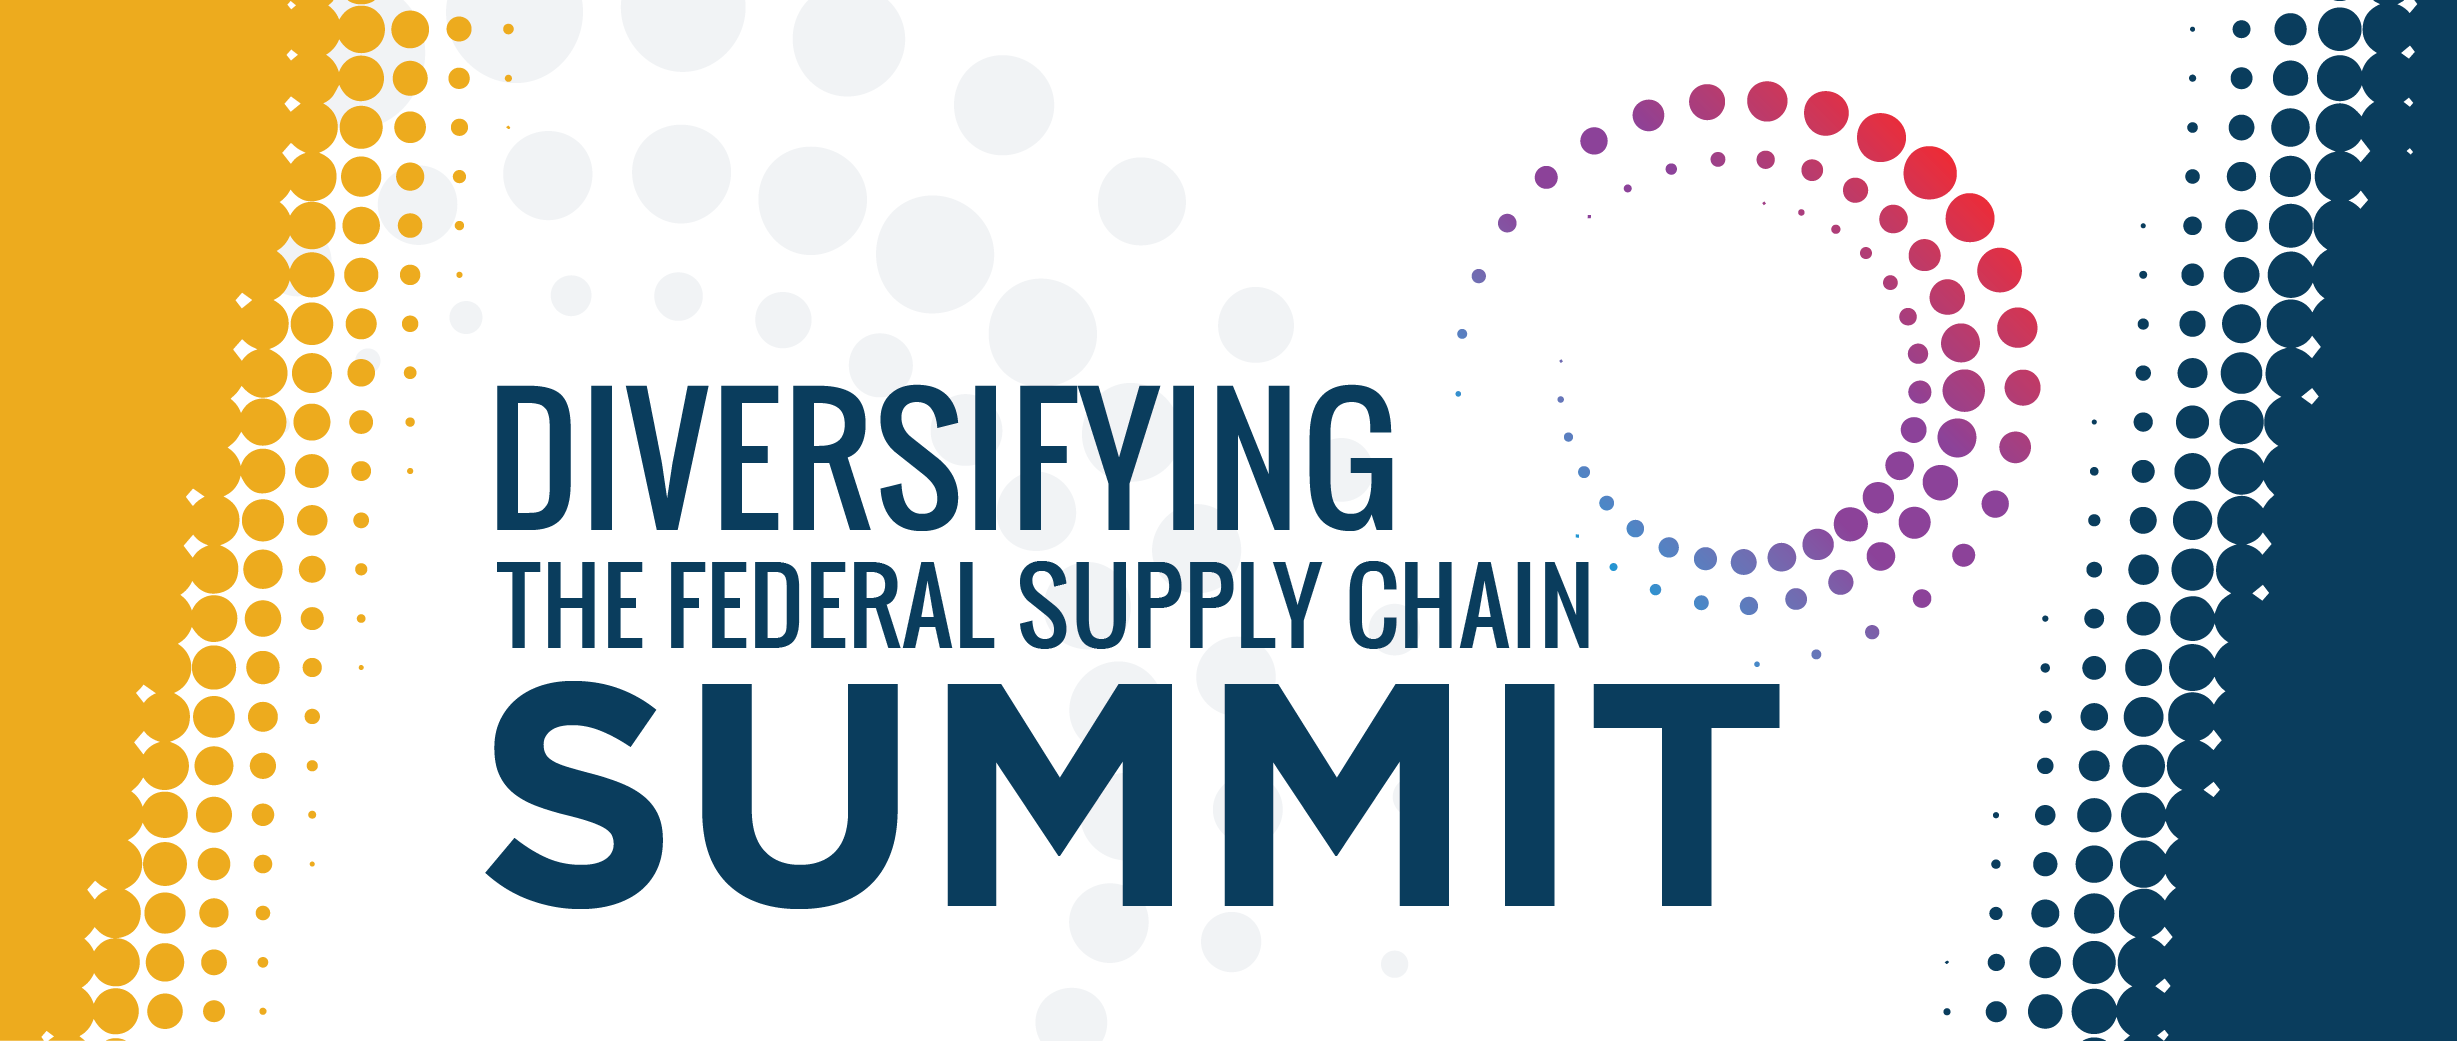 Diversifying the Federal Supply Chain Summit